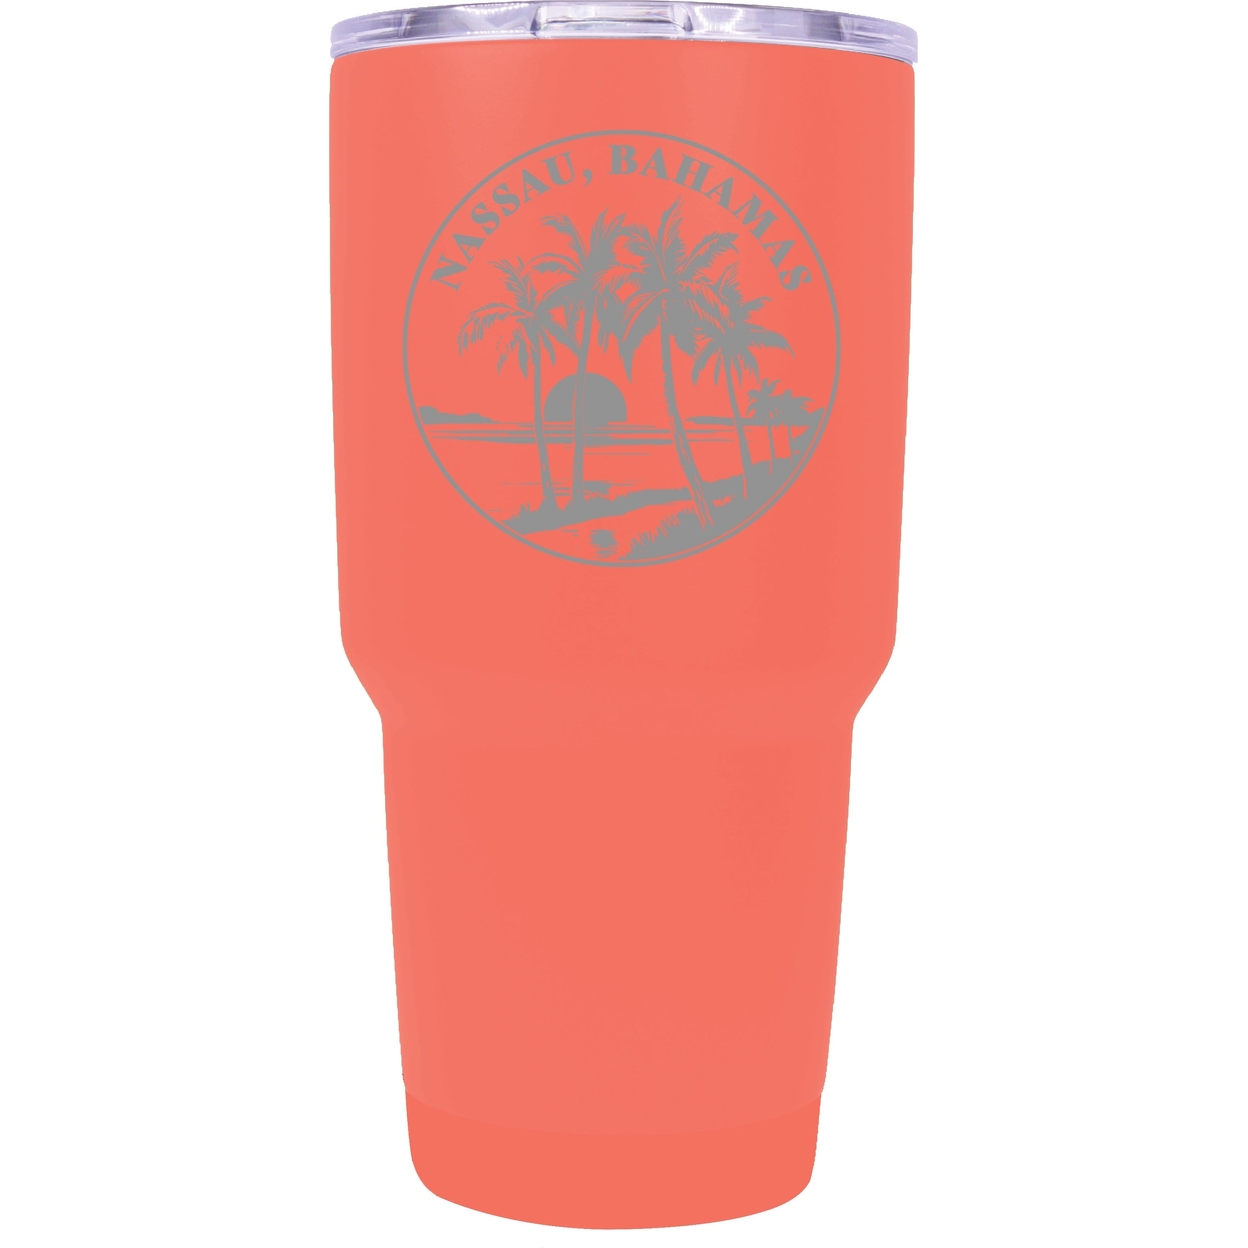 Nassau The Bahamas Souvenir 24 Oz Engraved Insulated Stainless Steel Tumbler - Coral,,Single Unit